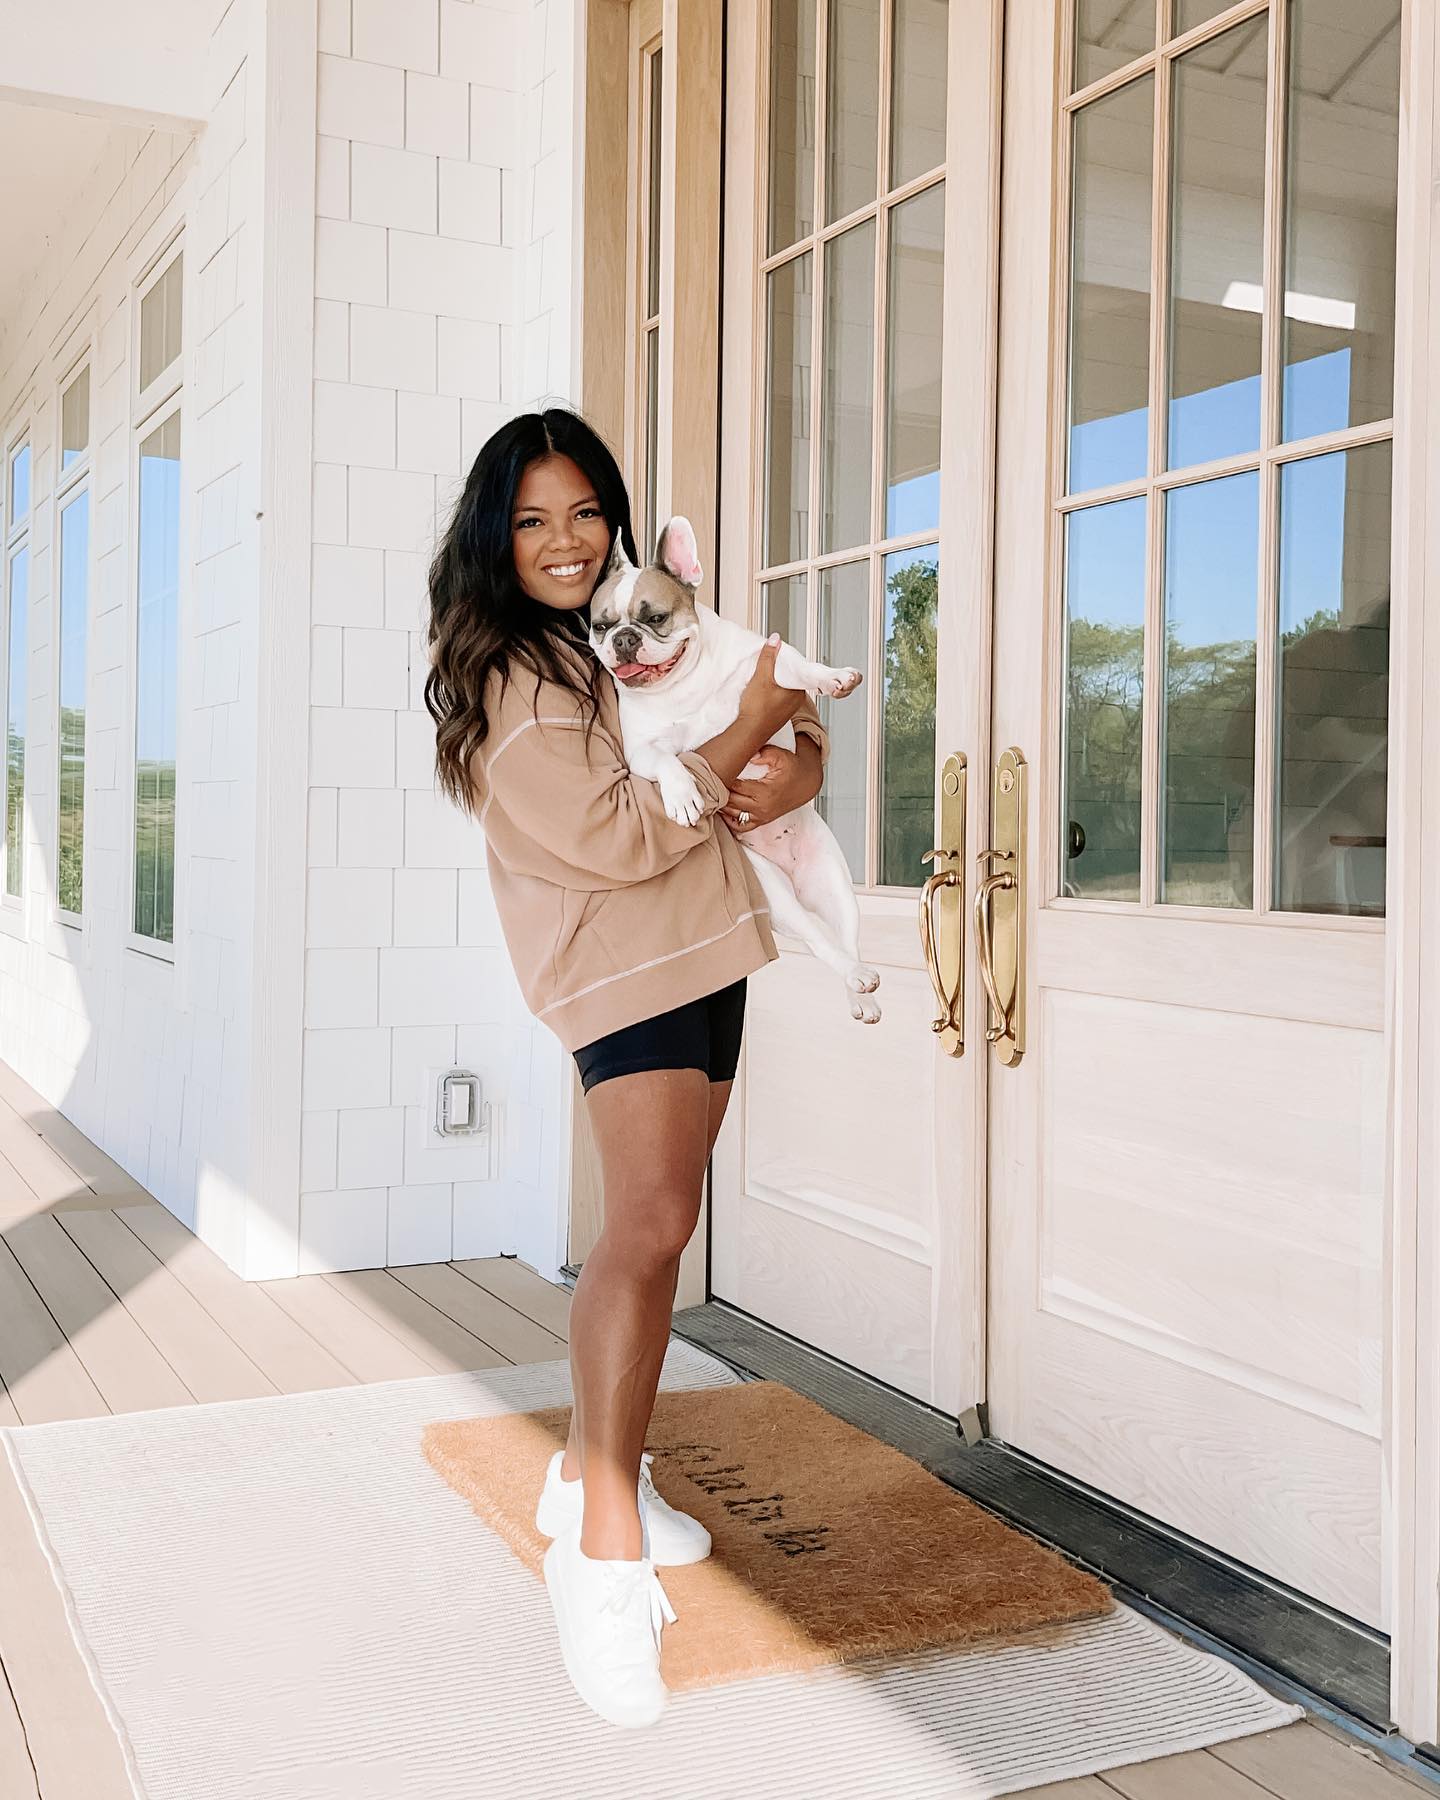 I just love coordinating with my dog ;-) Also, I love this tunic hoodie so much that I have it in 3 colors (gray, brown, and cream)! #ad RUN because these are now $15!  I joke that these hoodies are part of my weekly uniform. ;-) Check out the blog post for more Free Assembly pieces that are currently on sale! @WalmartFashion #WalmartFashion

To shop this image, go to the link in my bio and select “shop my Instagram.” You can also find me on the @shop.ltk app! #liketkit #LTKsalealert https://liketk.it/3G1qD